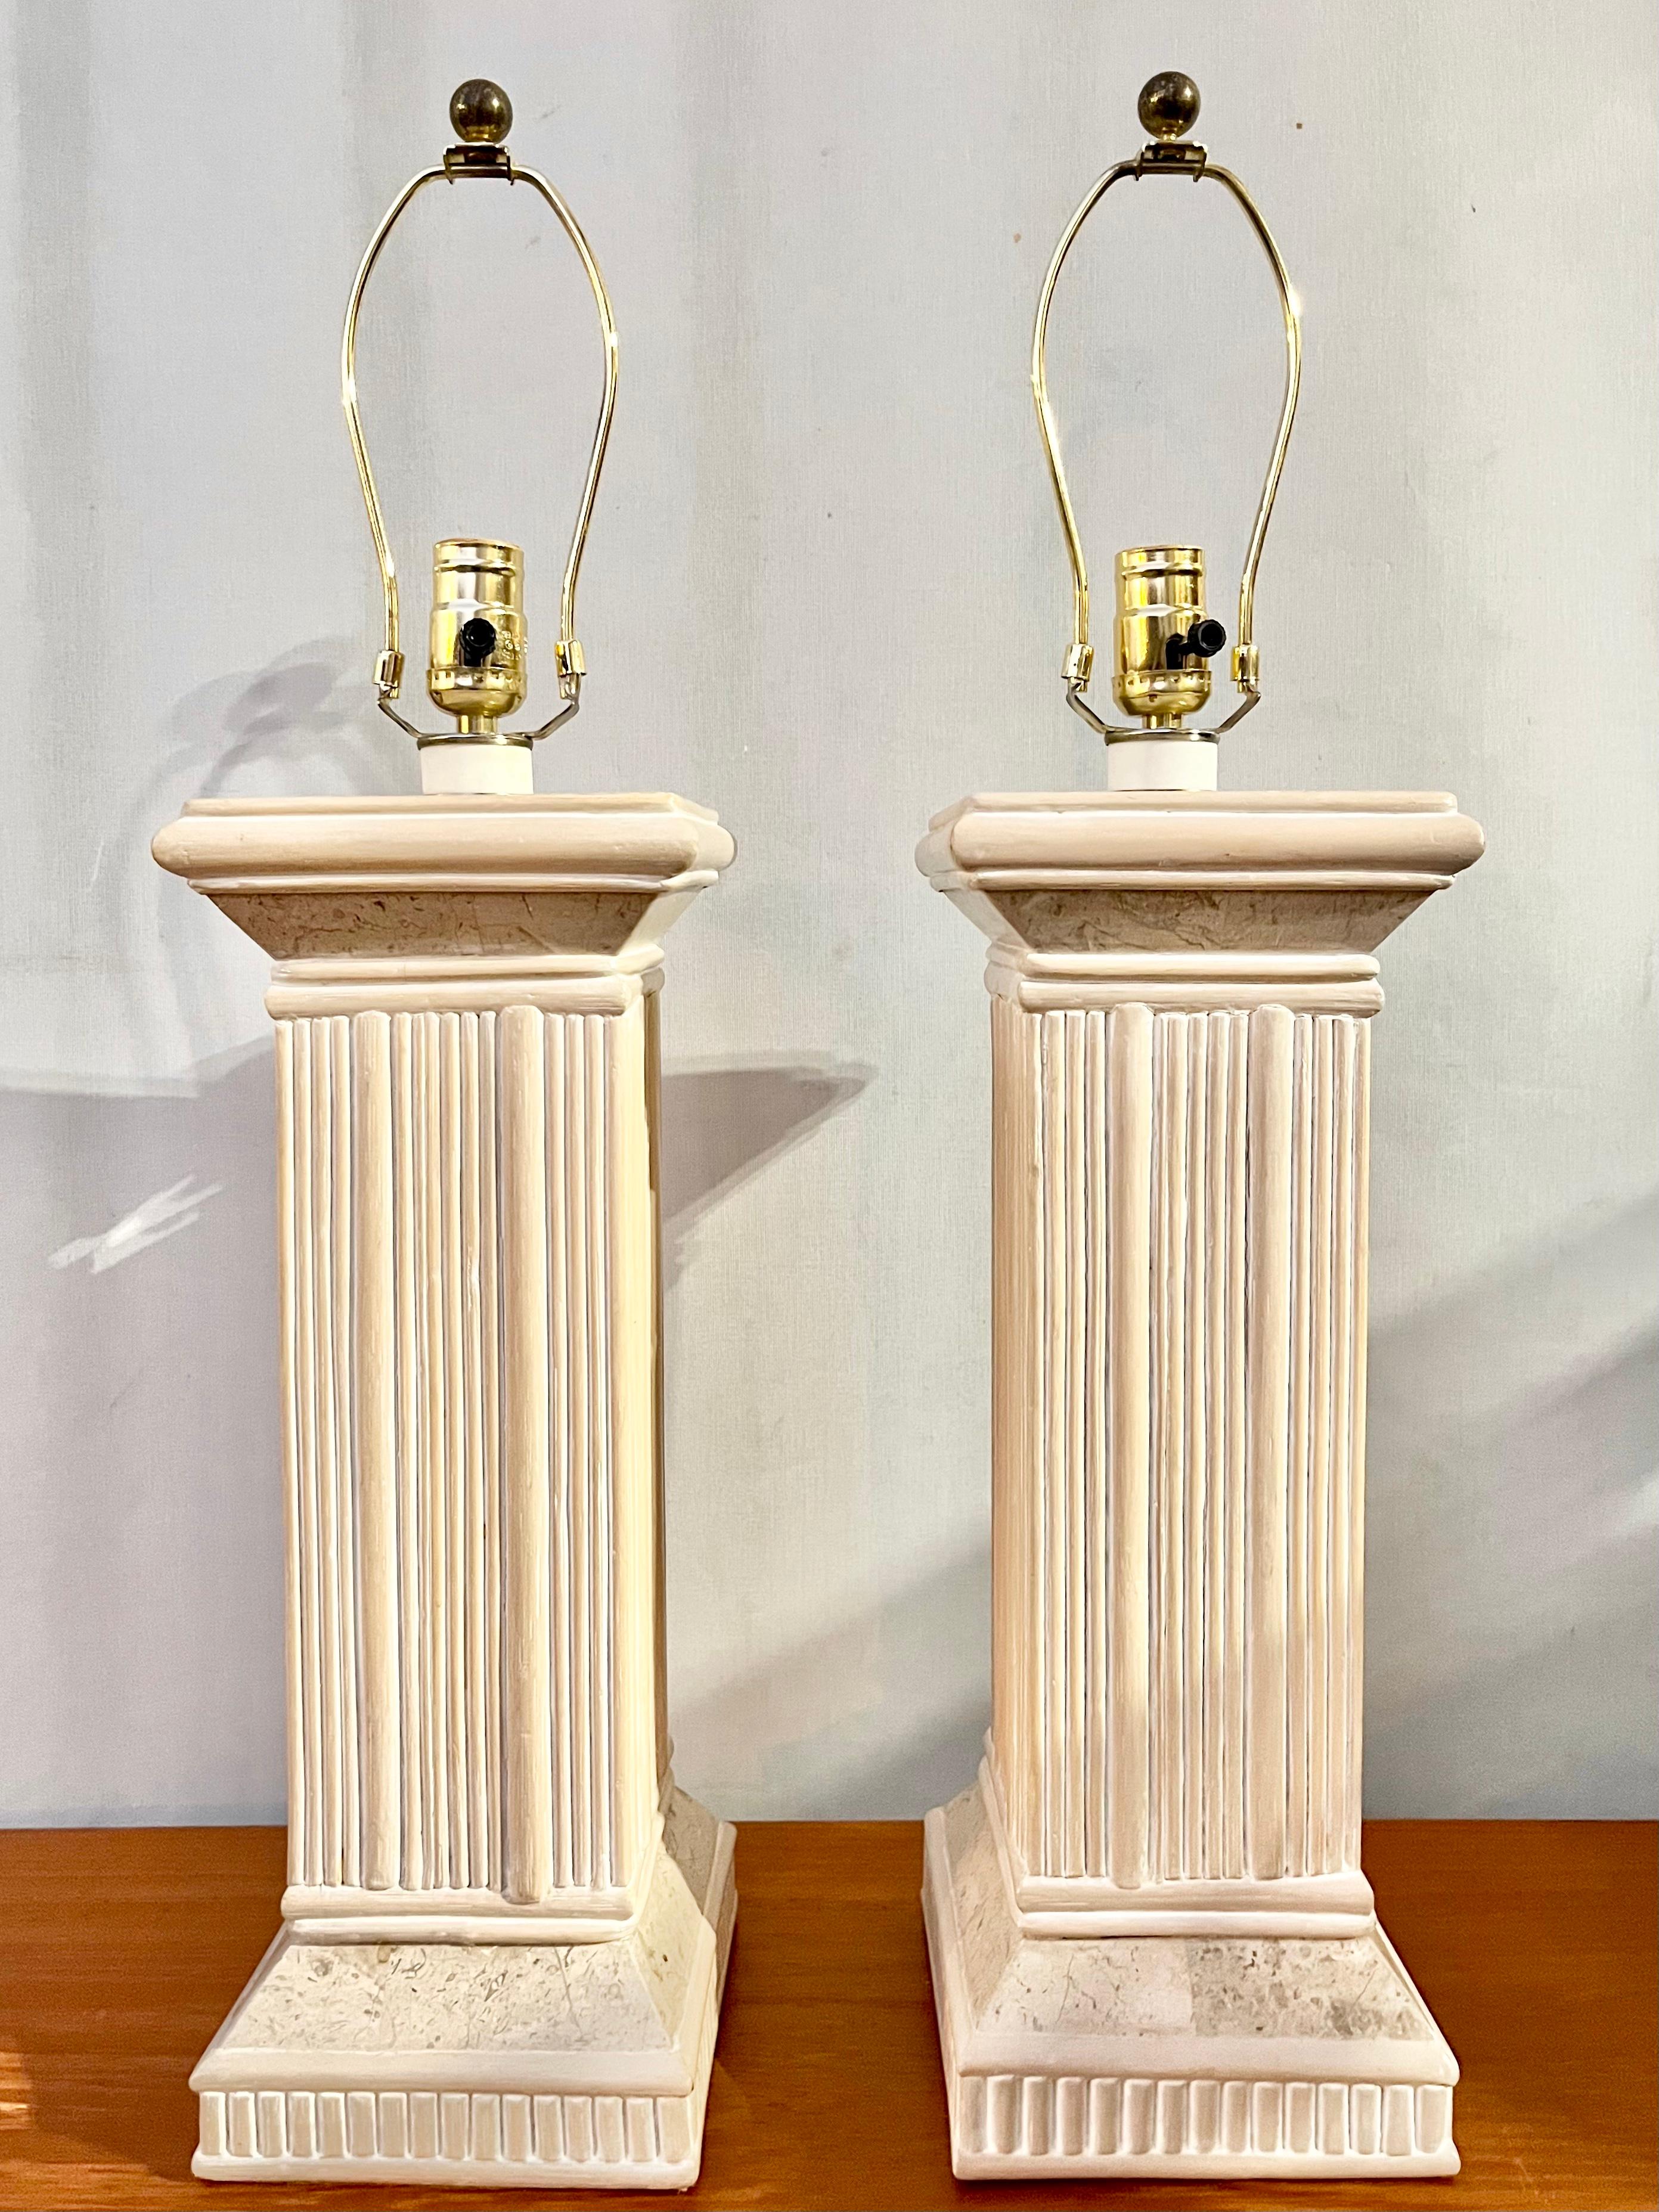 A pair of Hollywood Regency / Coastal Style Pencil Split Reed Rattan and Faux Stone Table Lamps. Circa late 1980s
The lamps feature a soft cream color split rattan body with faux stone trims. 
The table lamps are in very good original cosmetic and